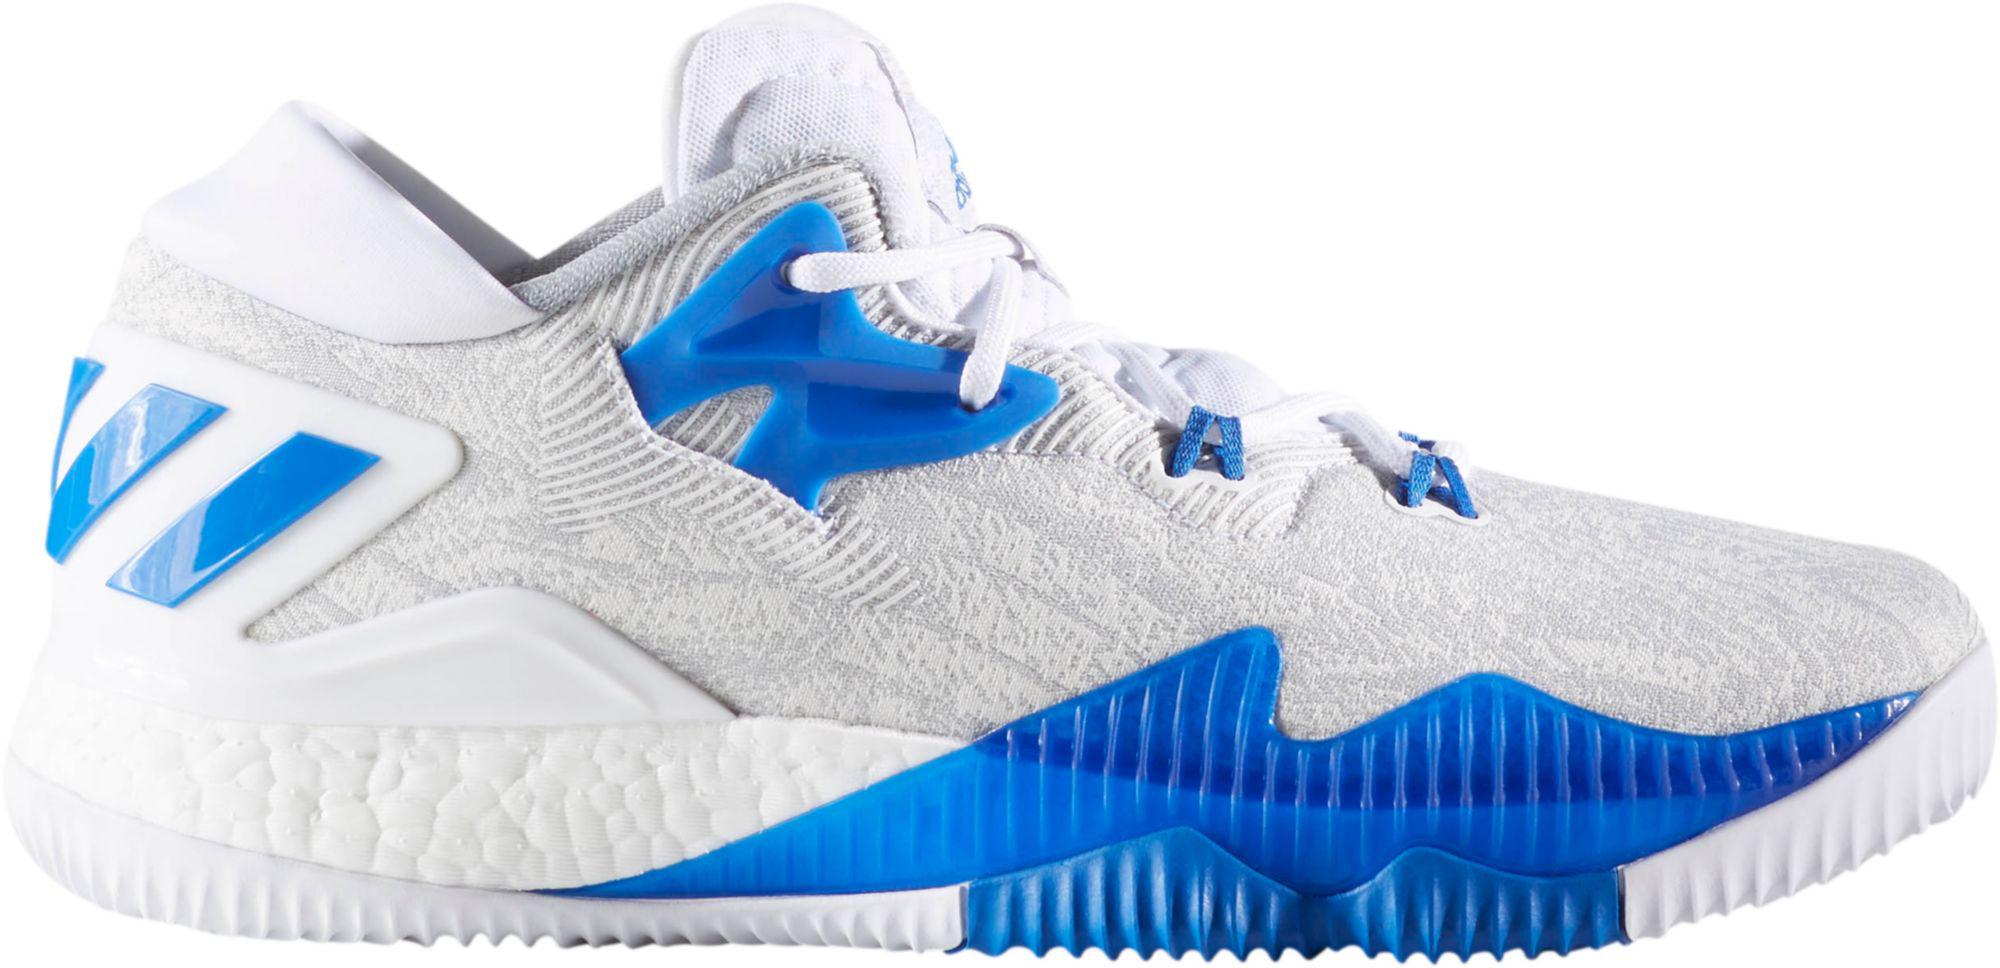 adidas Rubber Crazylight Boost Low 2016 Basketball Shoes